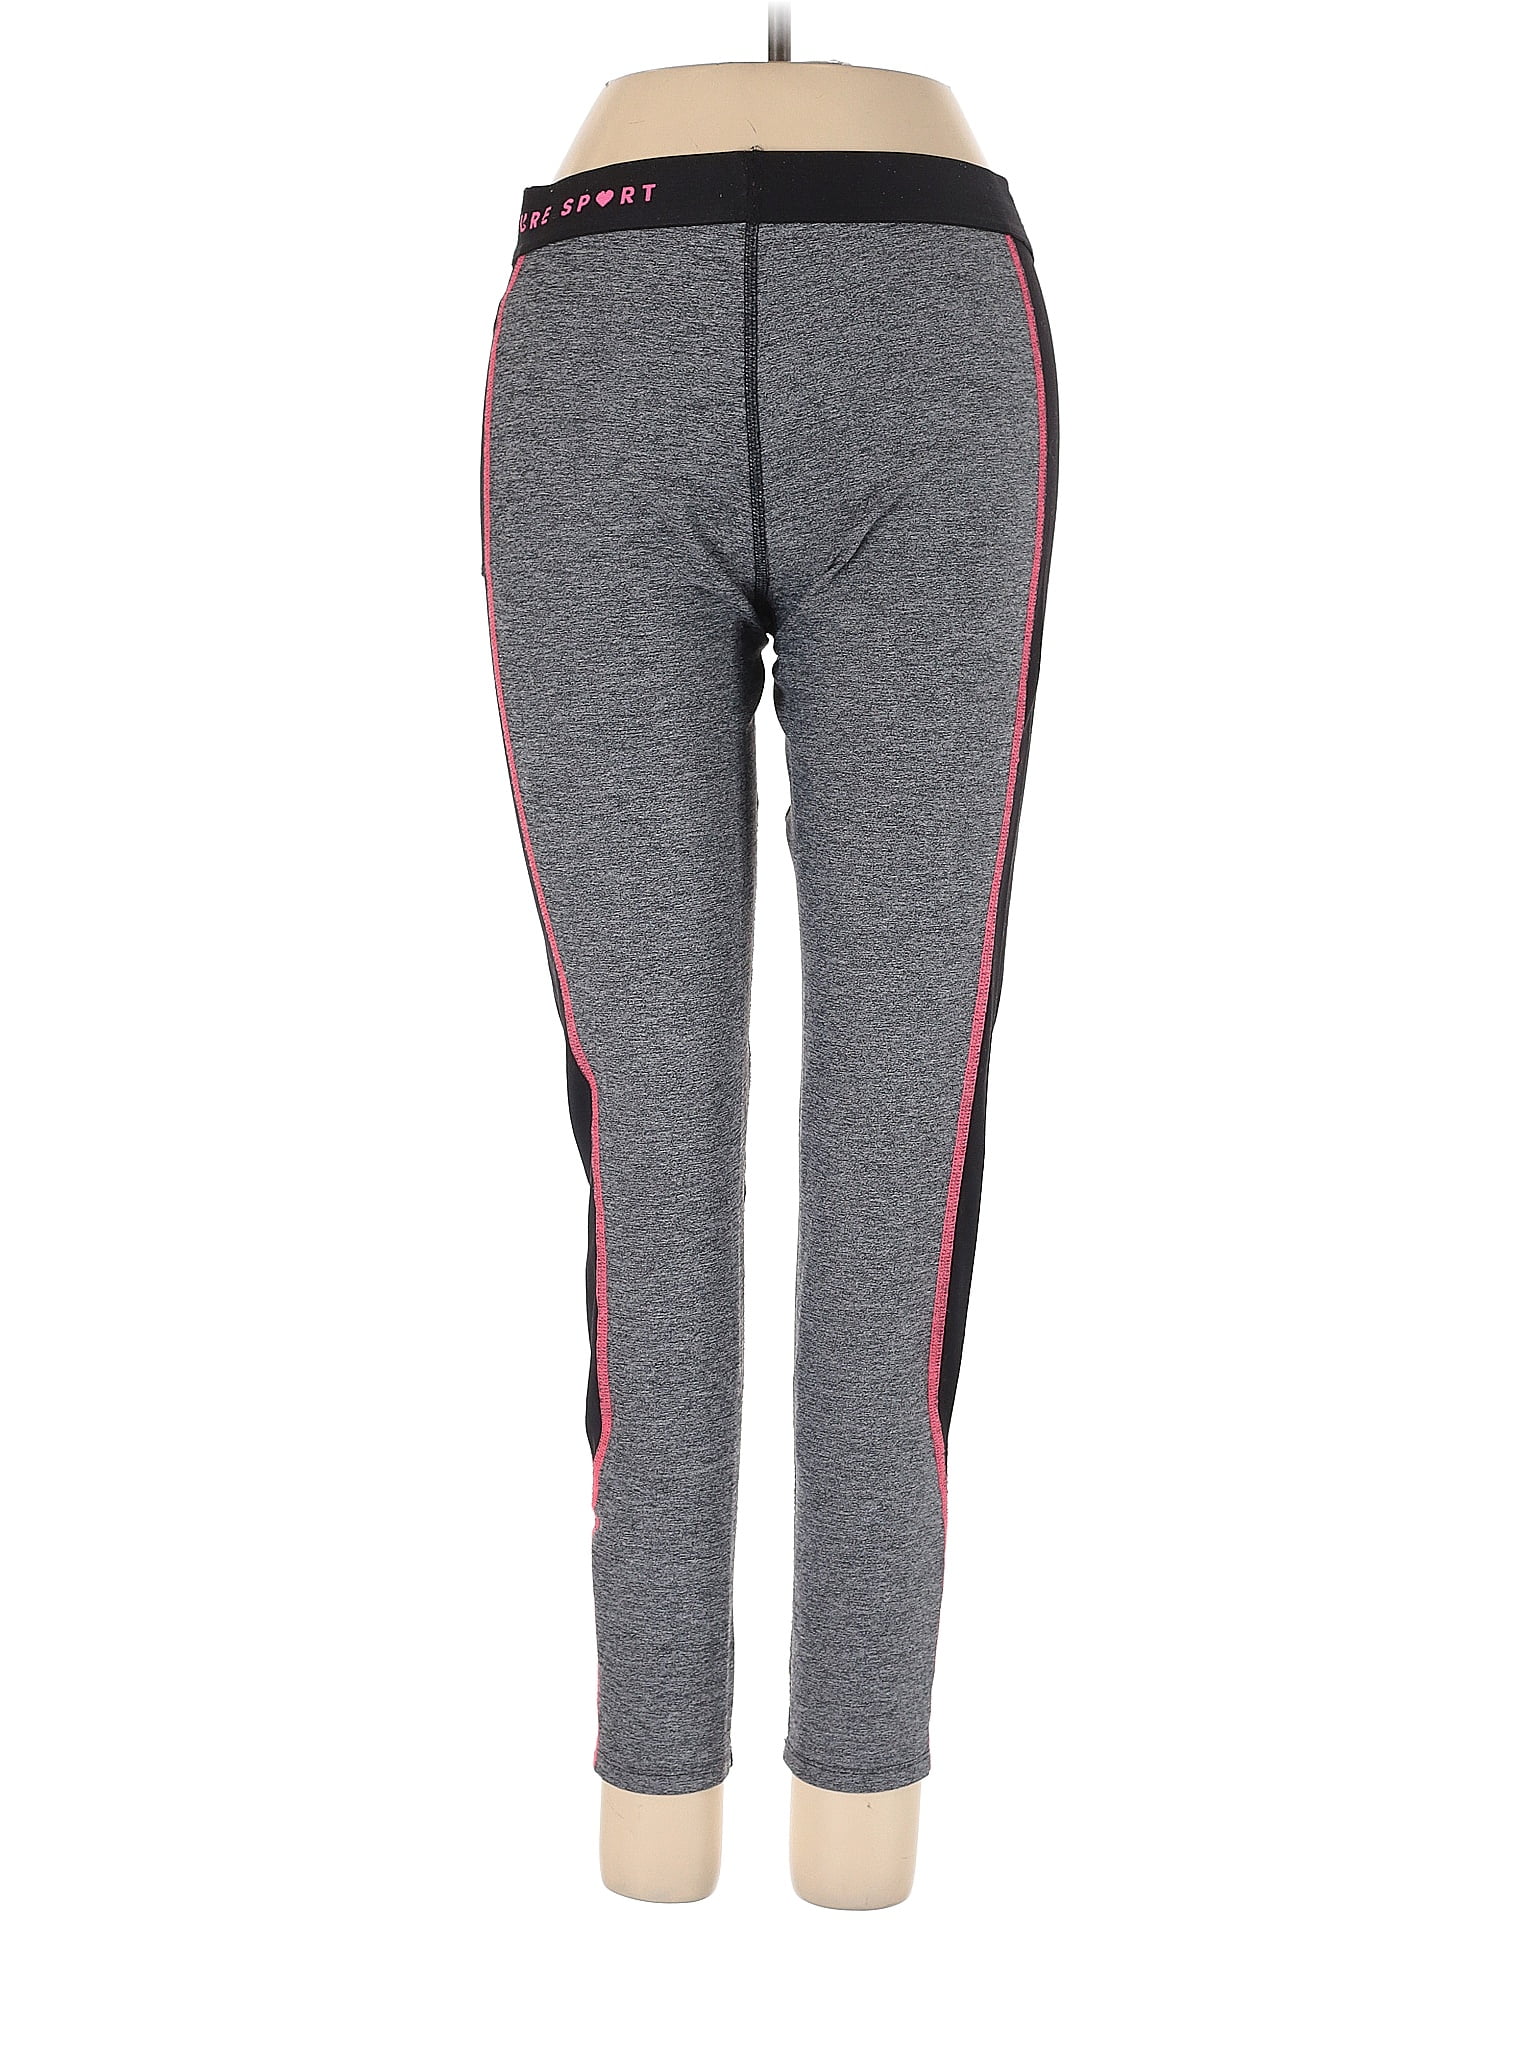 Juicy Couture Sport Women's Clothing On Sale Up To 90% Off Retail